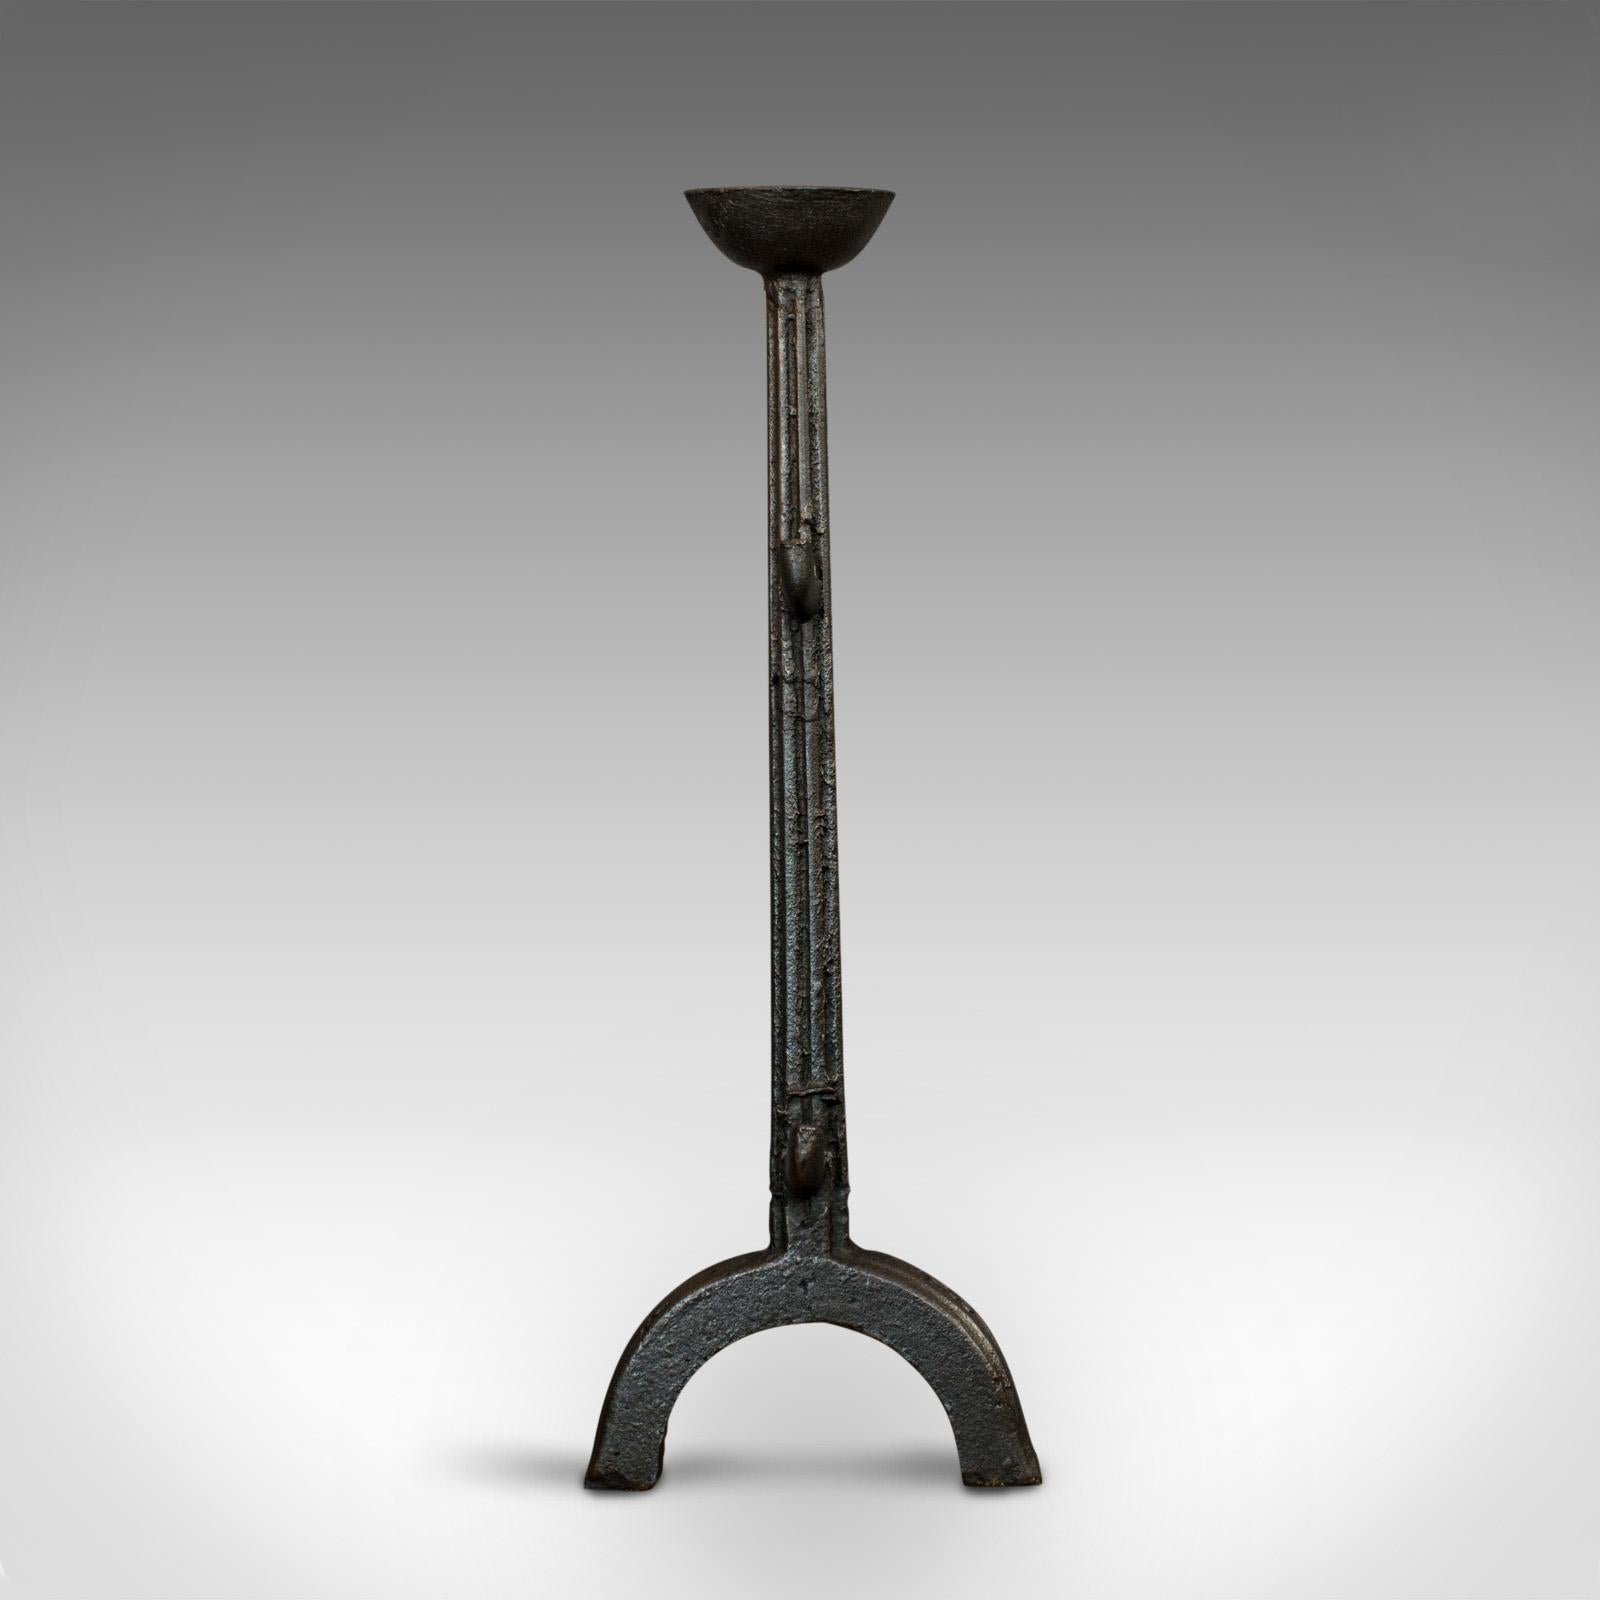 This is a large antique decorative firedog. An English, cast iron fireplace andiron, ideal for large candles, dating to the Georgian period, circa 1800.

Appealing fireside decor
Displays a desirable aged patina
Georgian cast iron in good